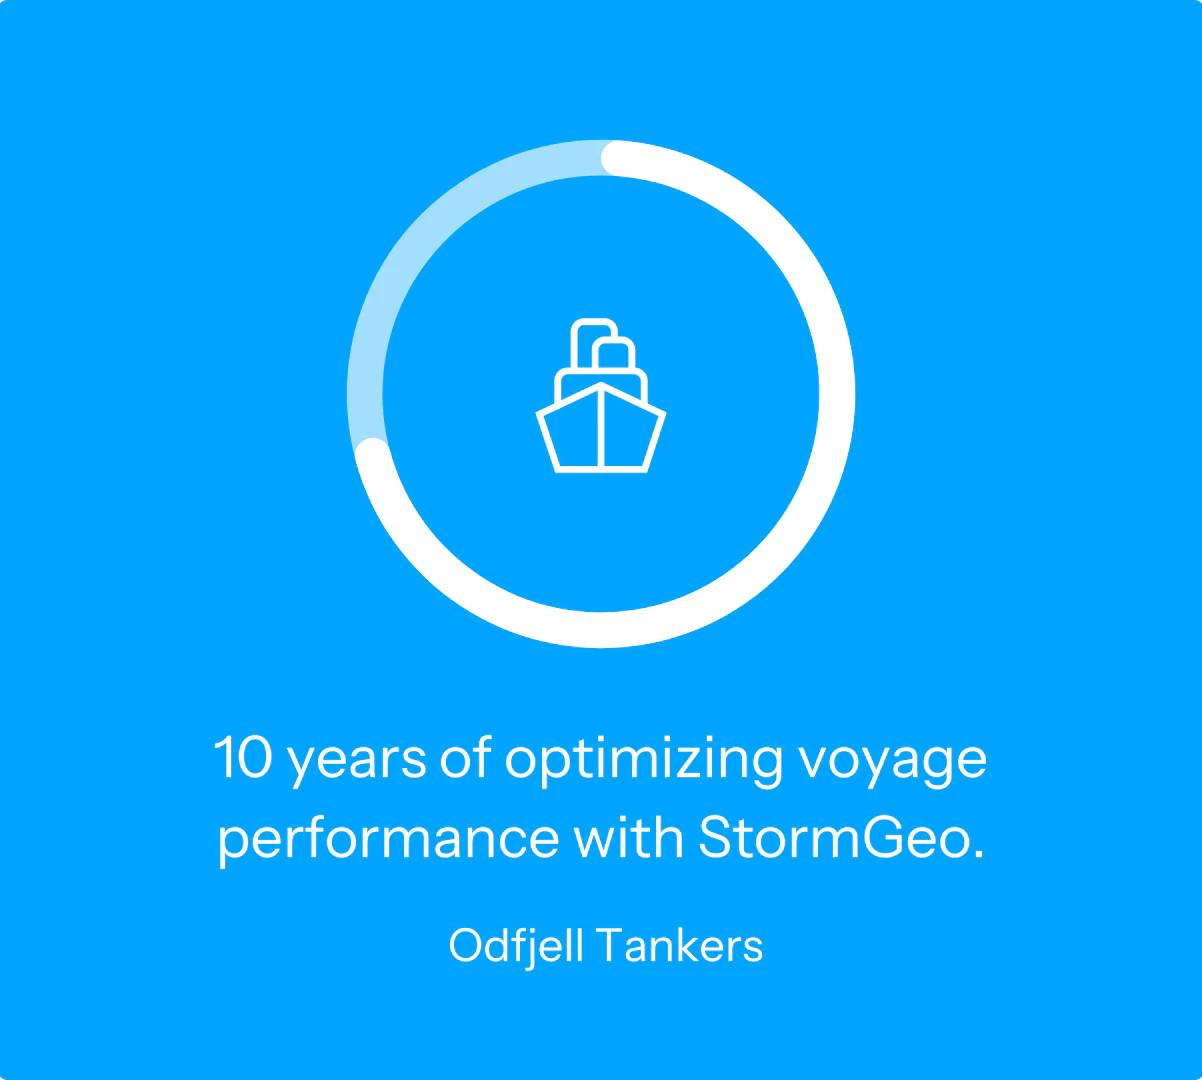 Odfjell Tankers with StormGeo